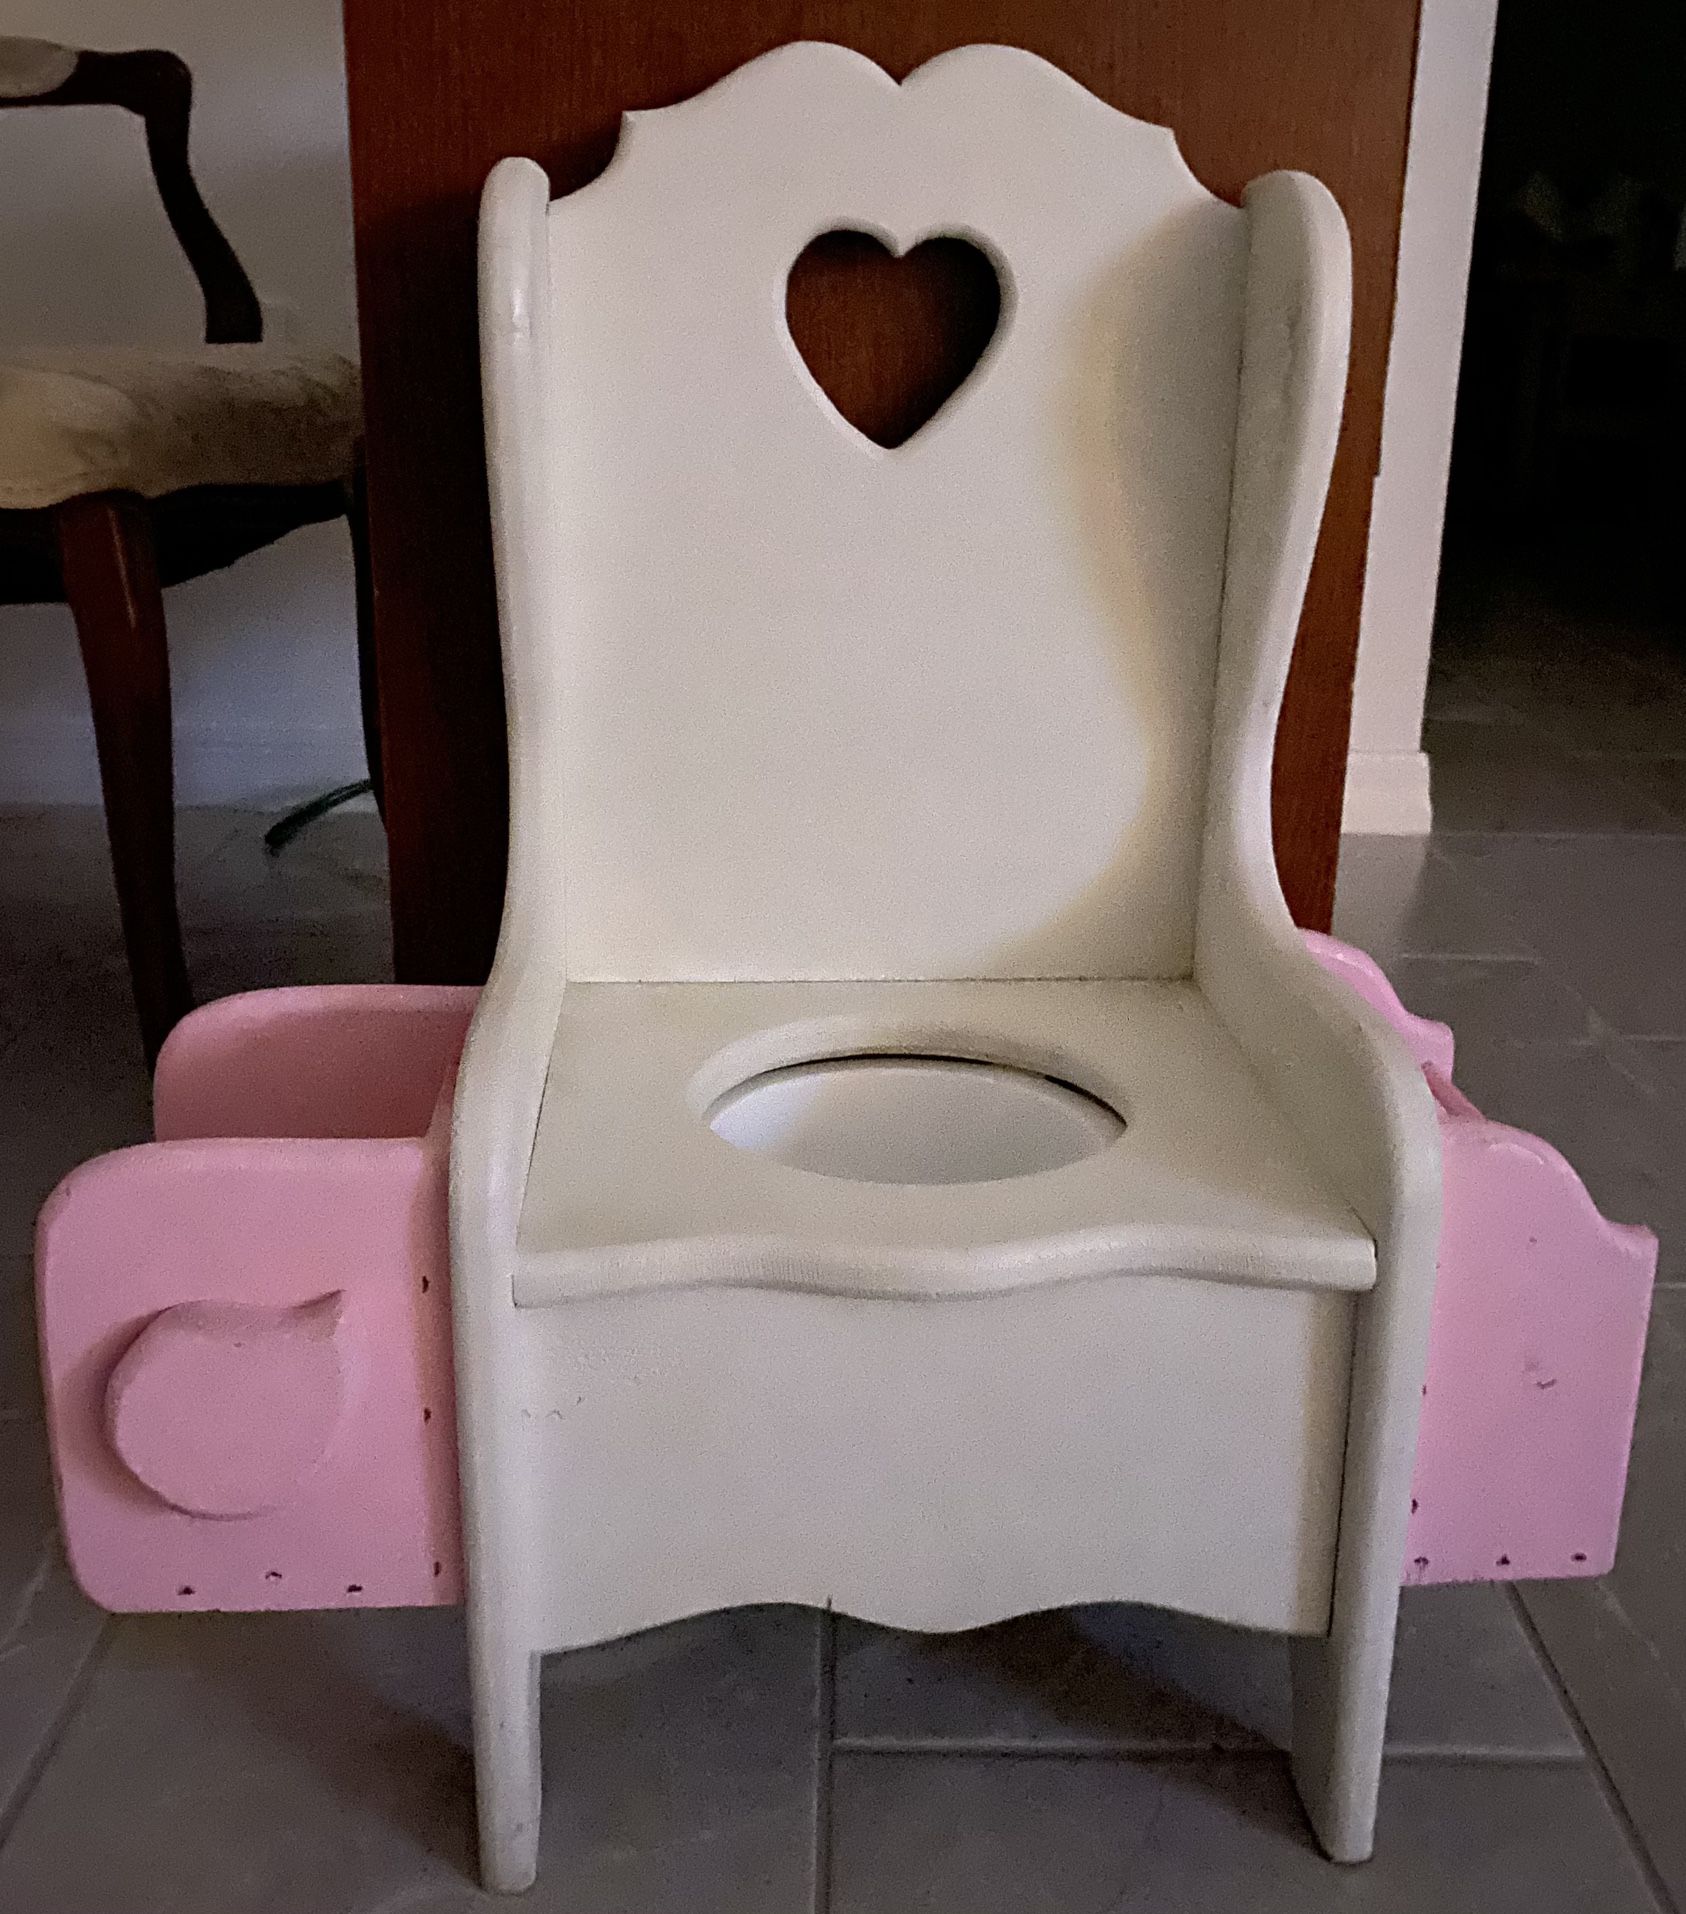 Wooden Potty Training Chair